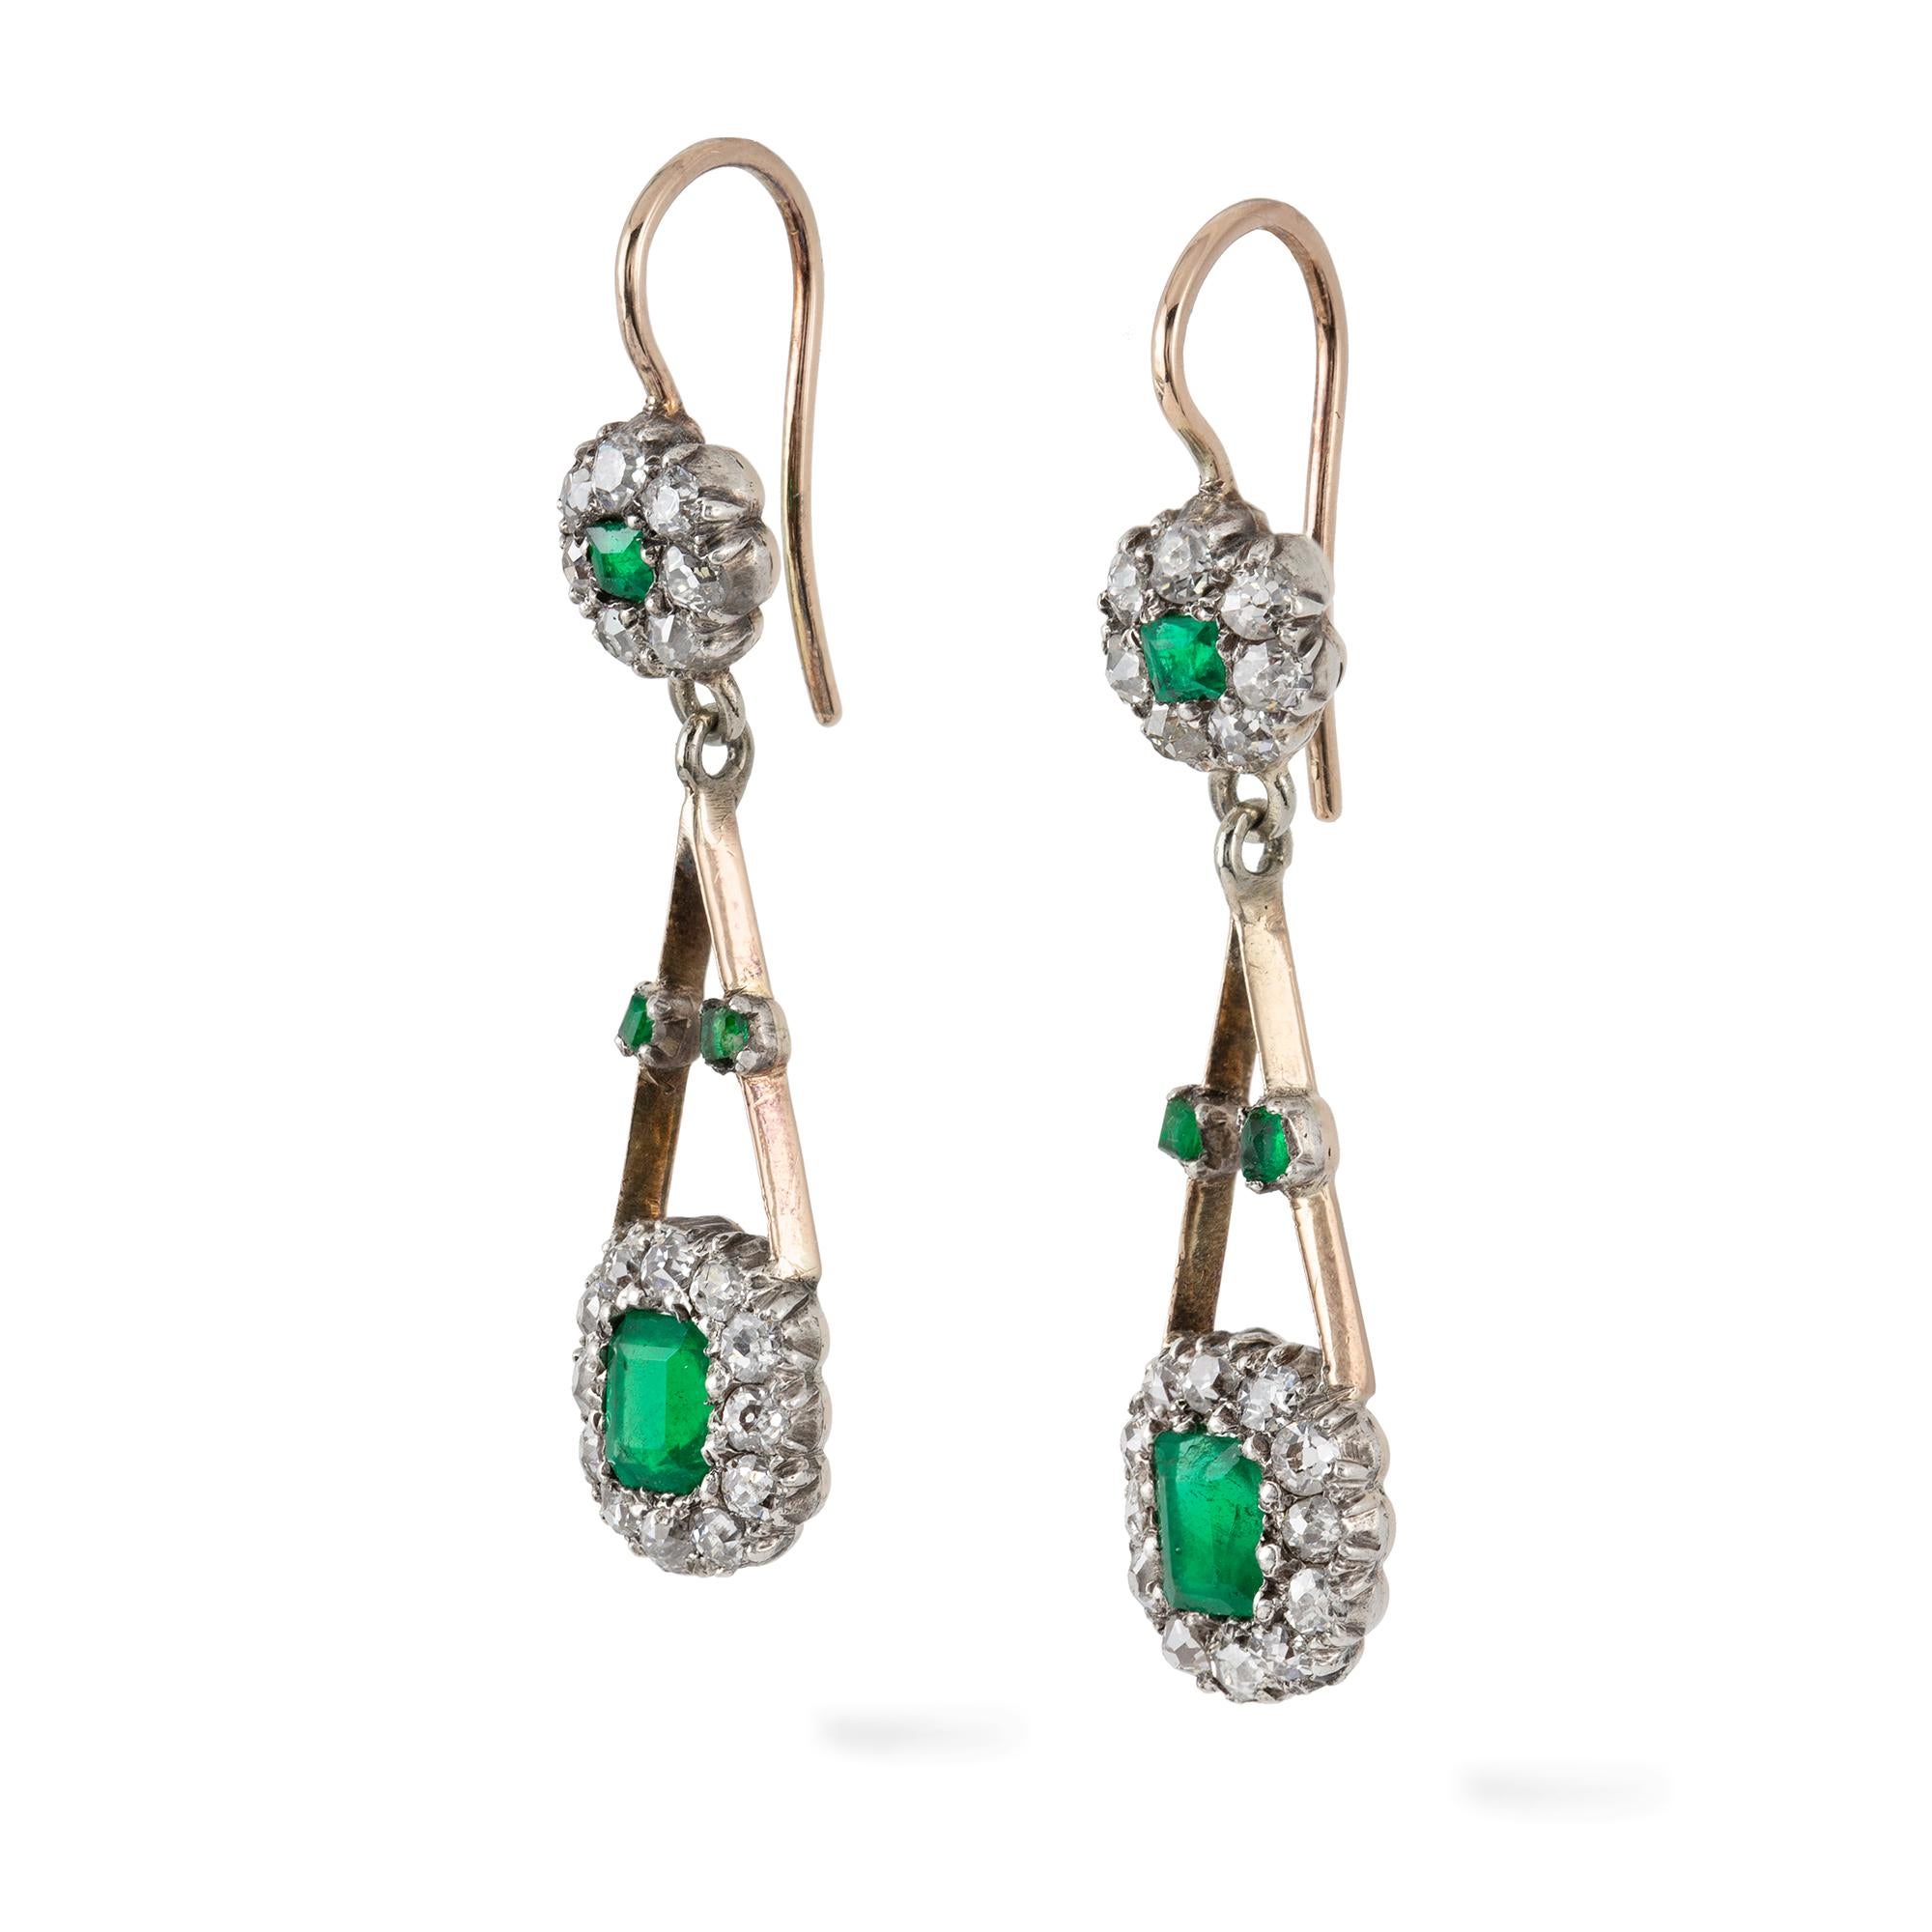 A pair of Edwardian emerald and diamond earrings, each earring with a cushion-cut emerald surrounded by twelve old-cut diamonds attached to two knife-edged gold bars forming a V, suspended by a cluster consisted of a square-cut emerald and seven